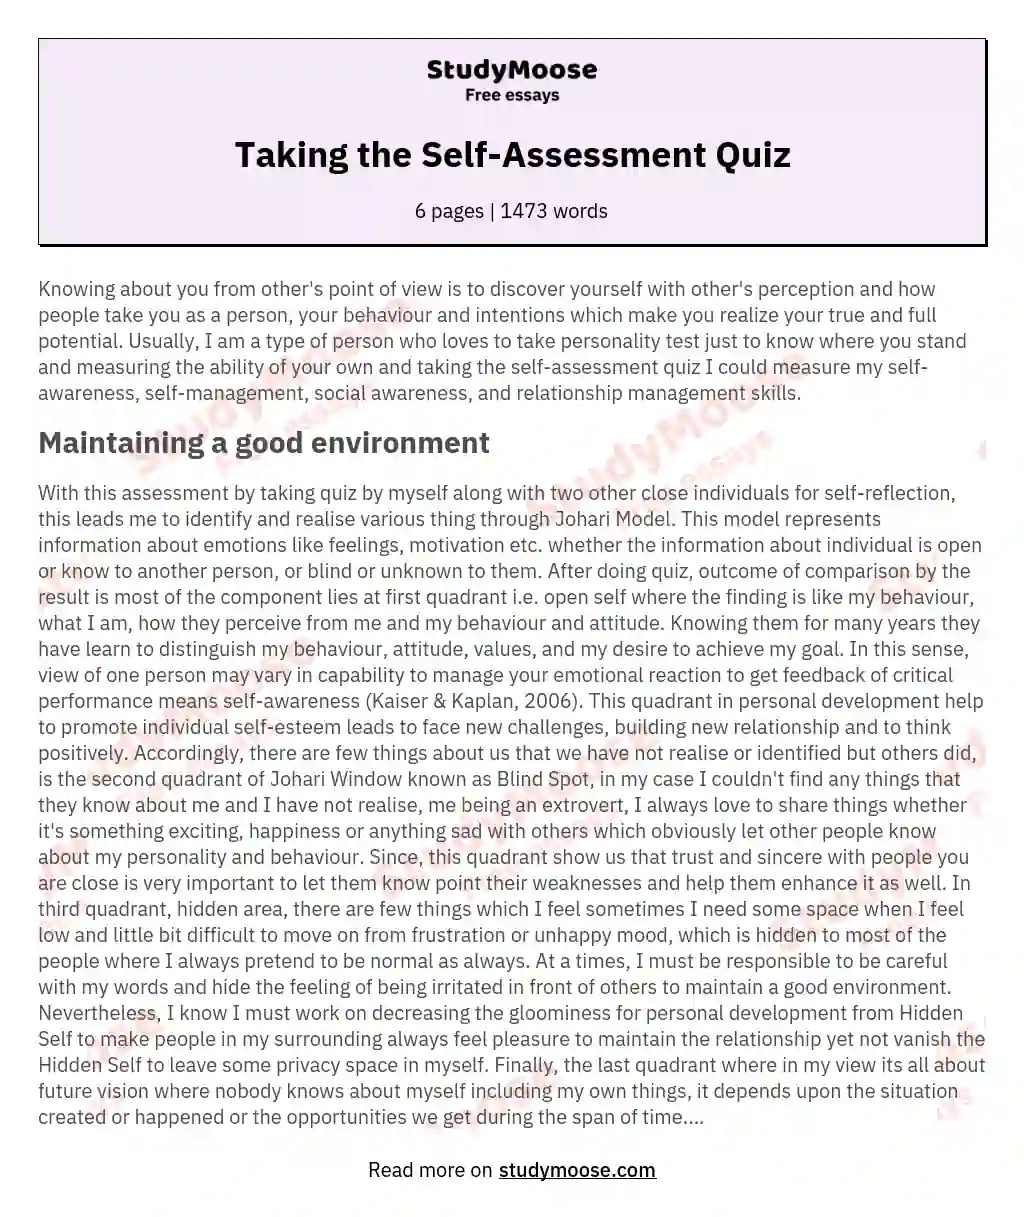 Taking the Self-Assessment Quiz